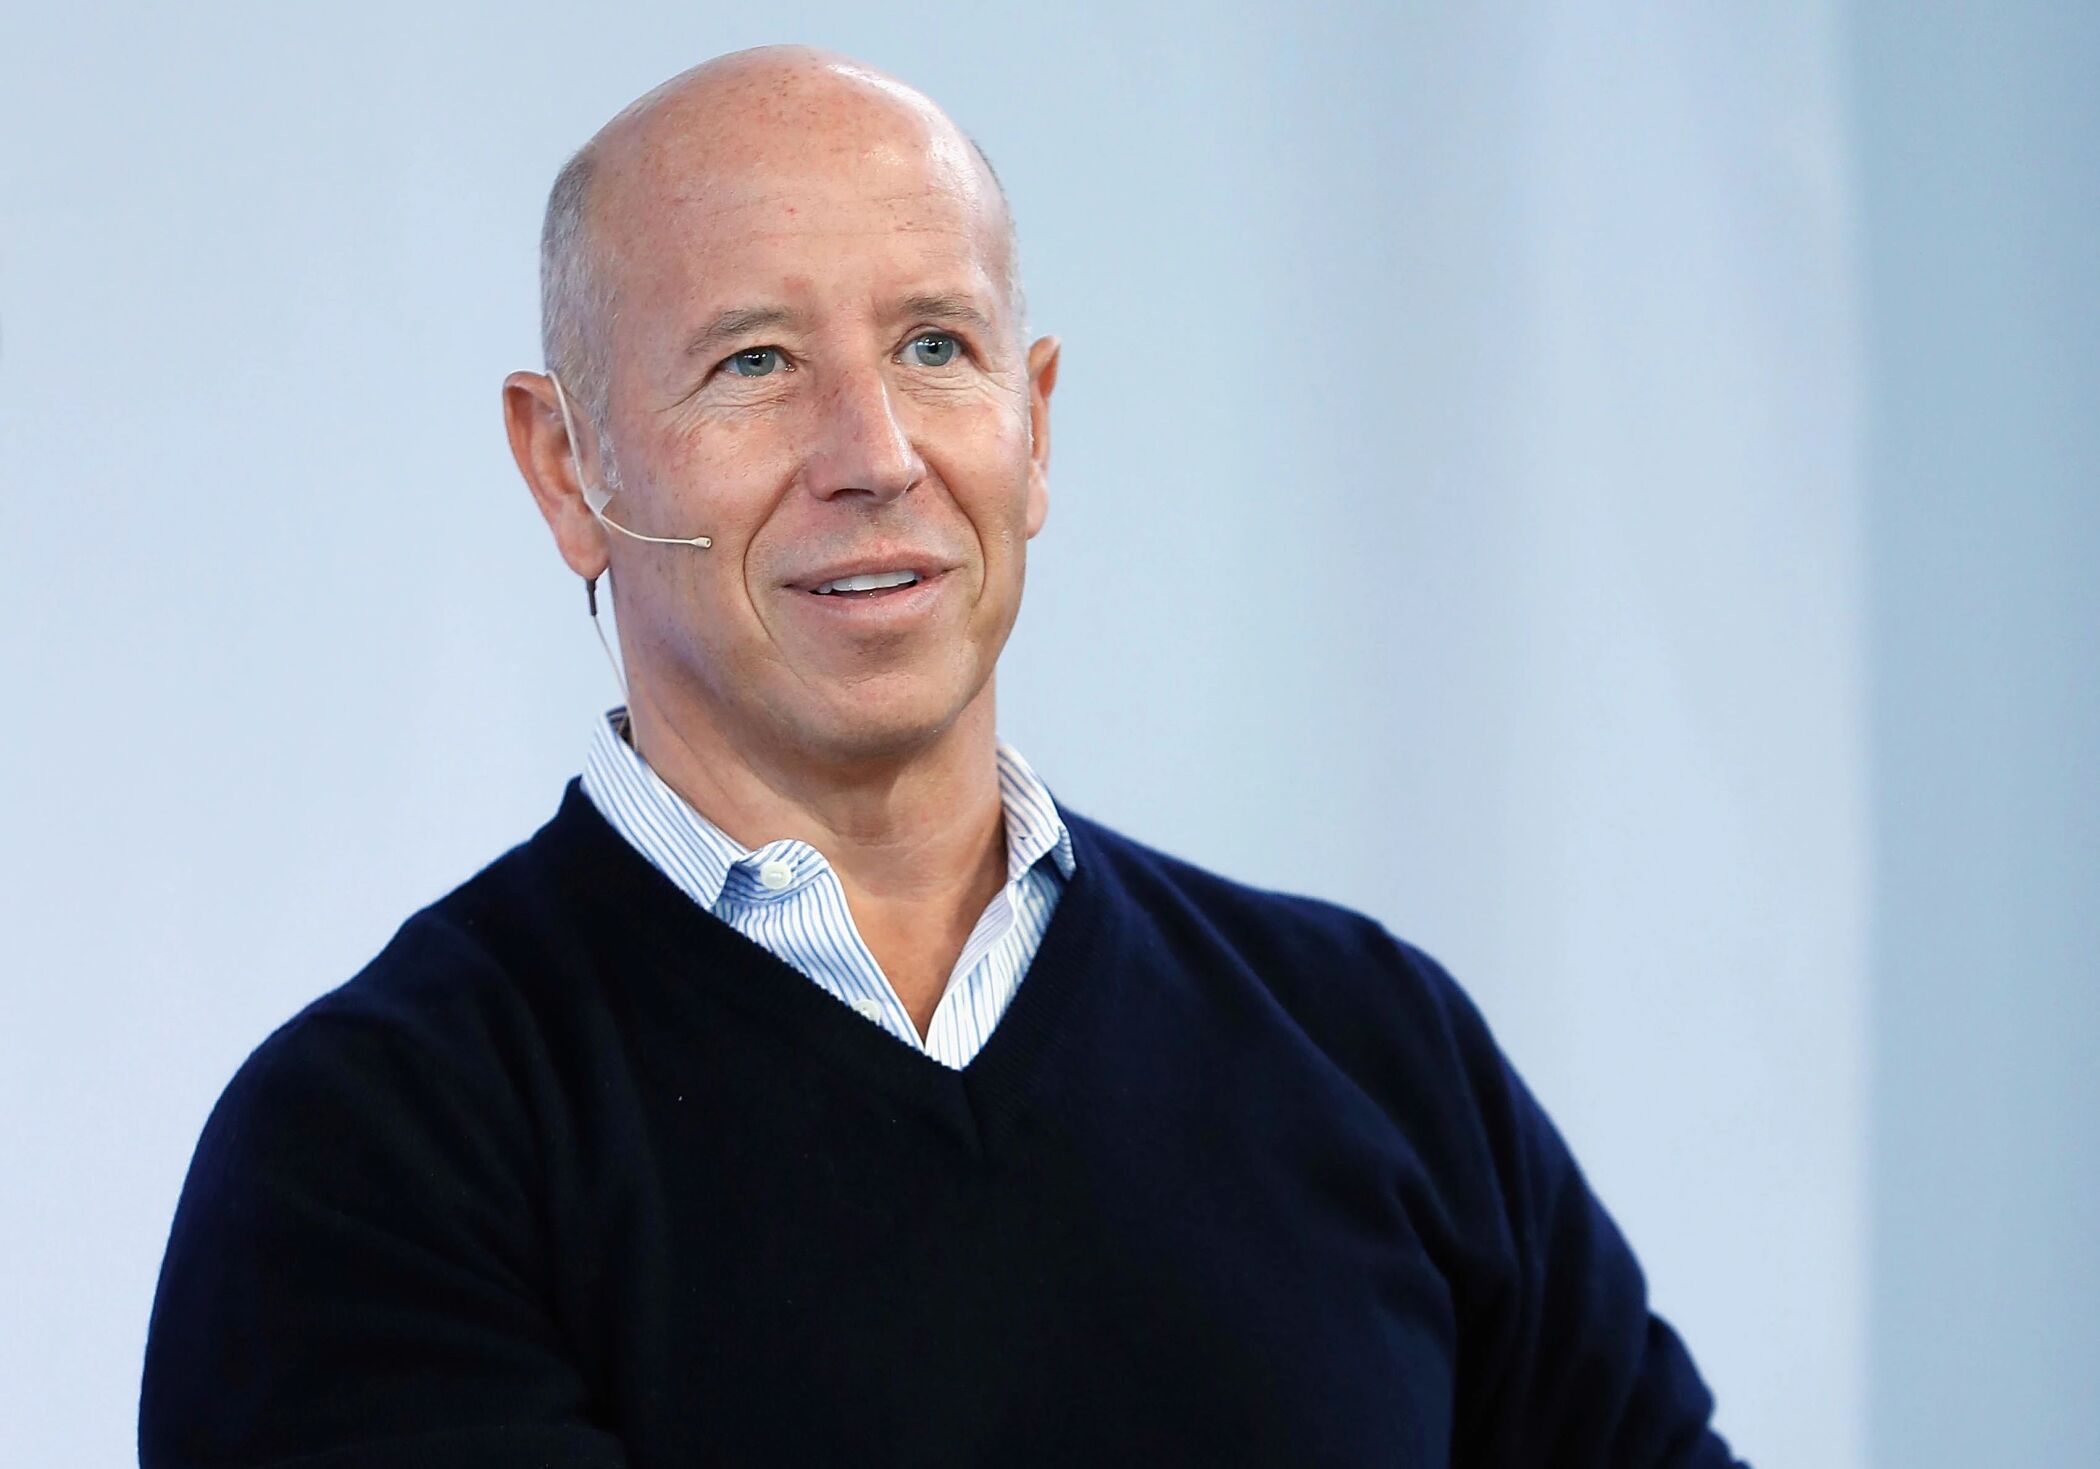 Barry Sternlicht is chairman of Starwood Real Estate Income Trust. (Getty Images)